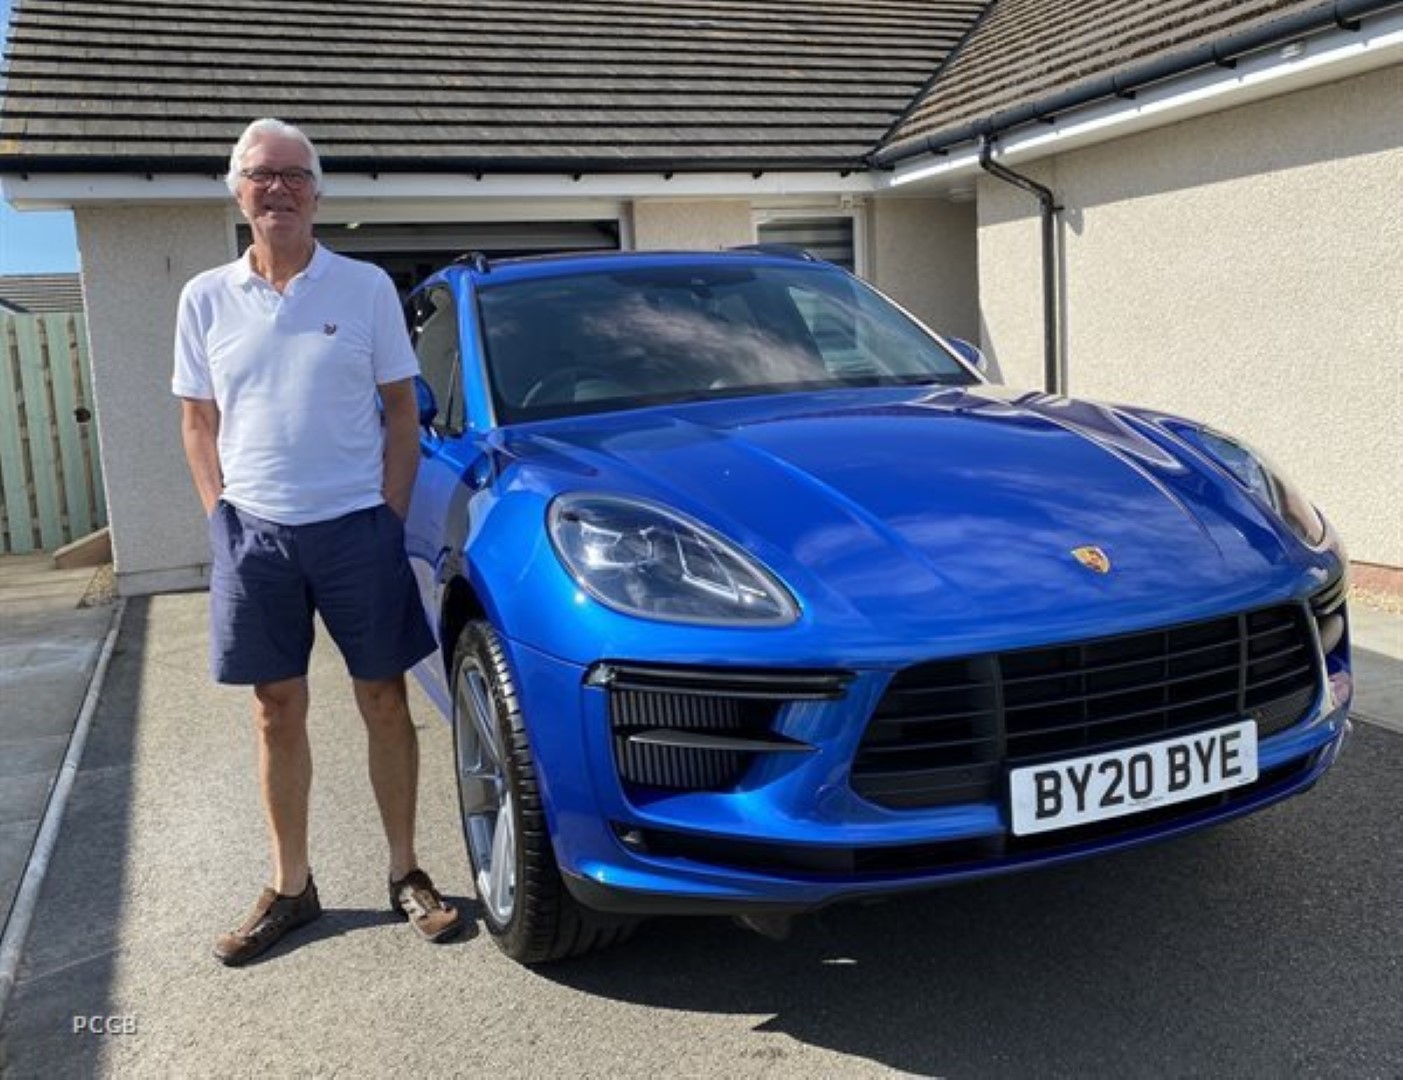 Brian Innes's Macan Turbo Experience